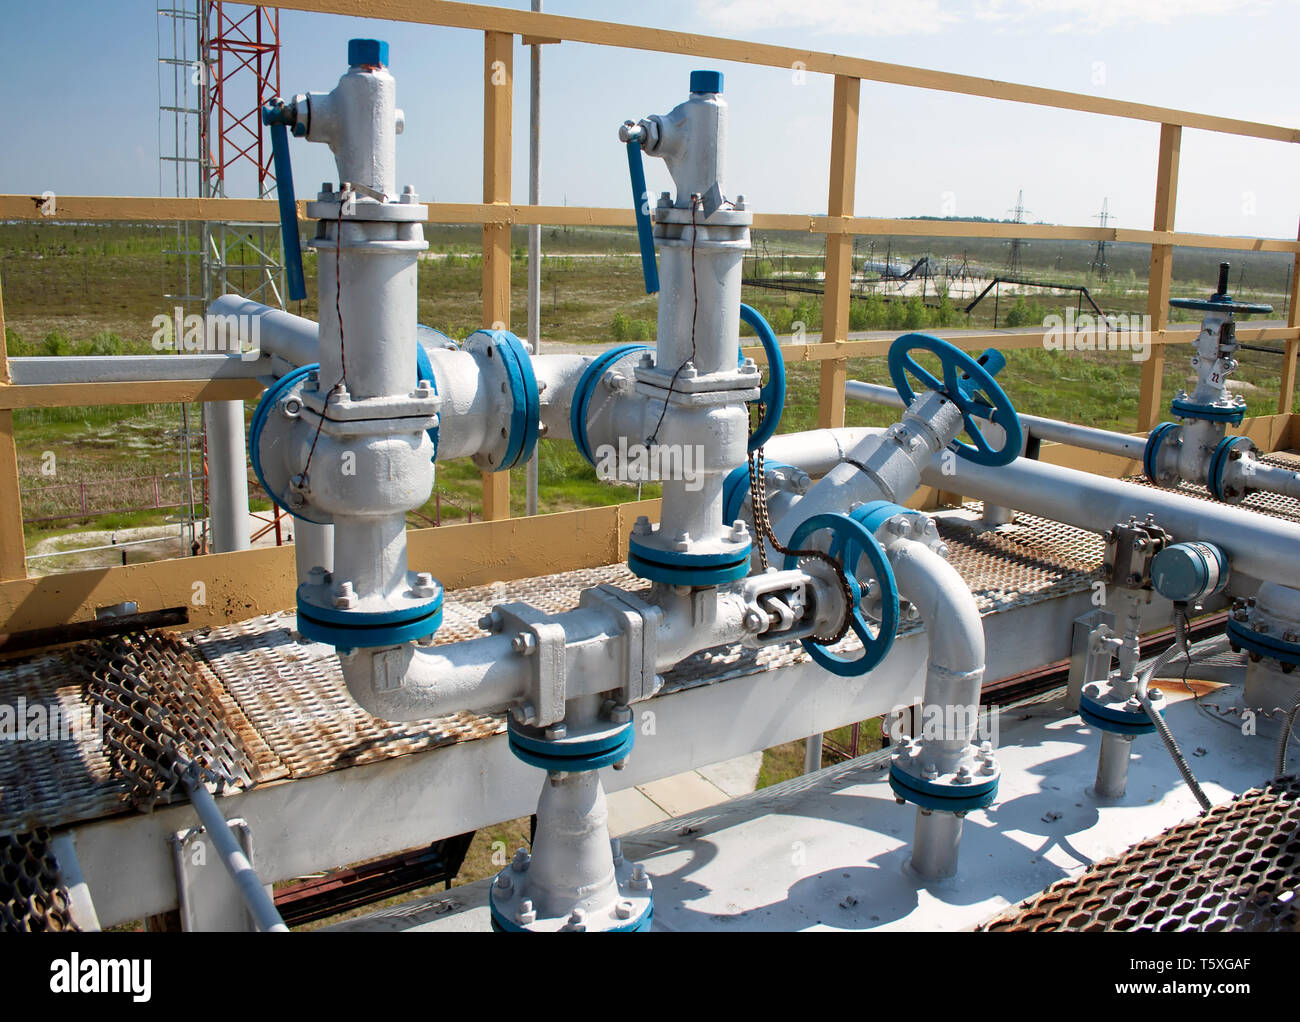 Group valves control the oil production on oil and gas refinery plant. Oil industry Stock Photo